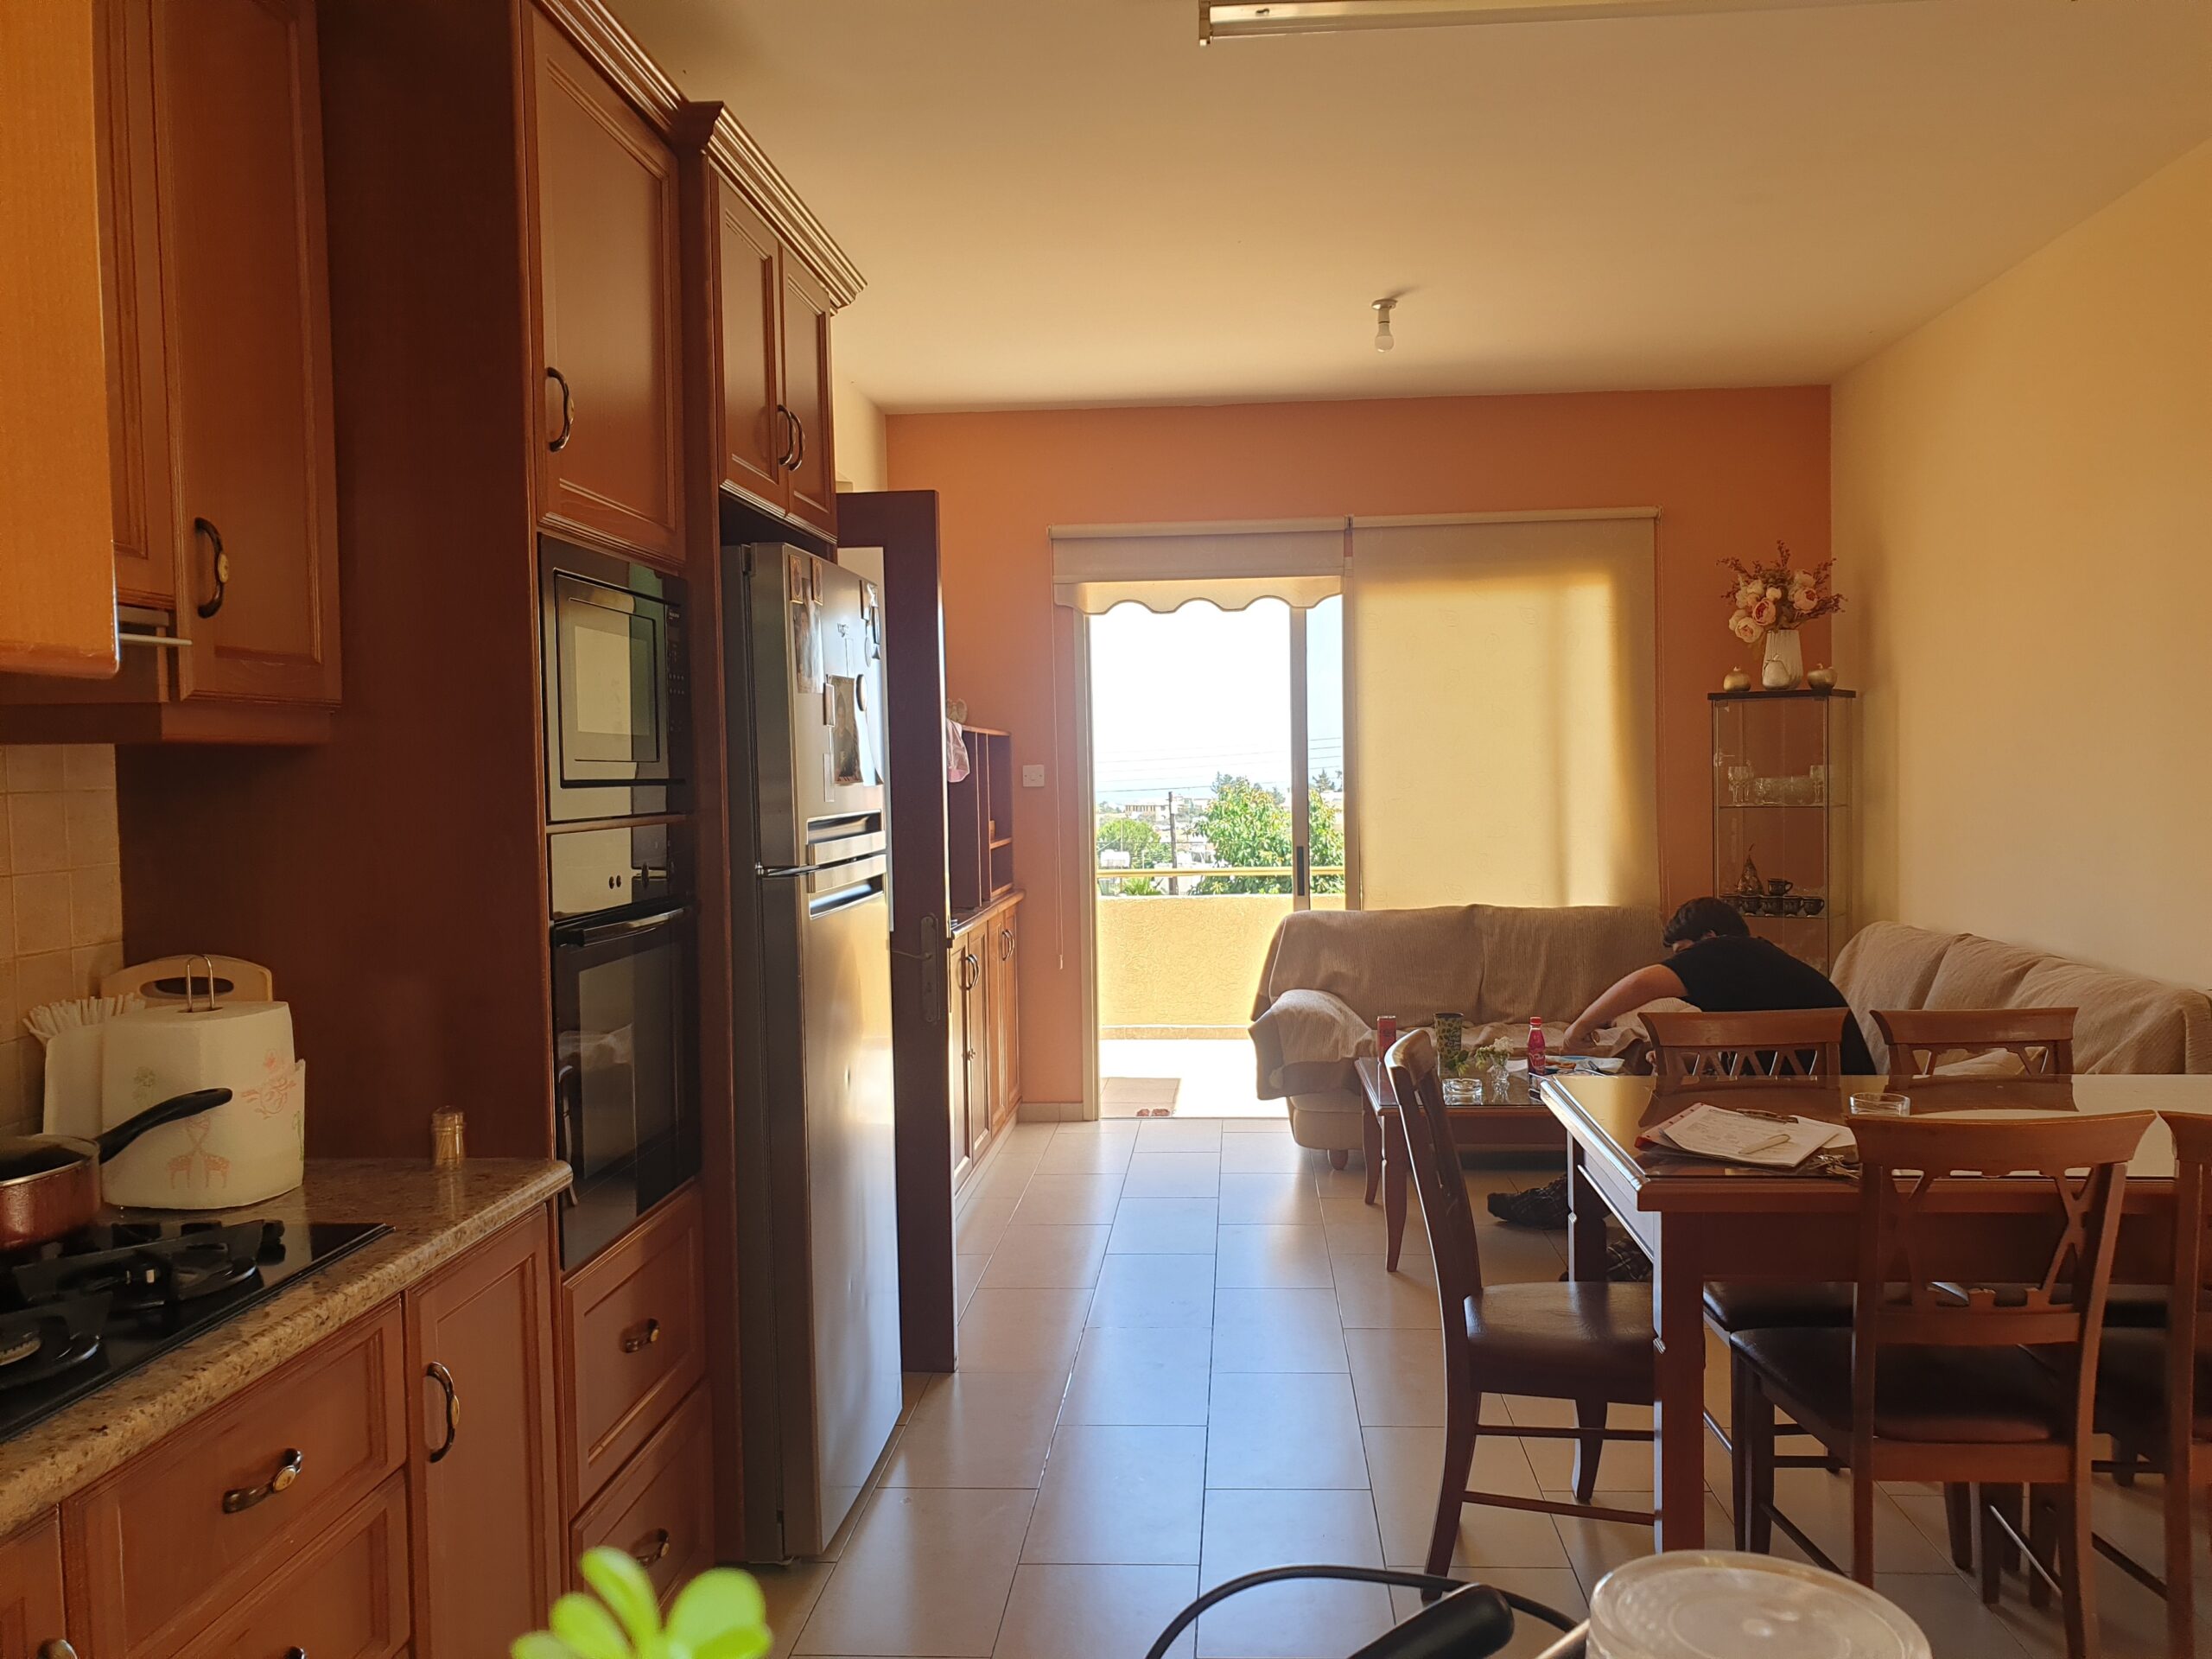 Detached house for sale in Agia Phyla area